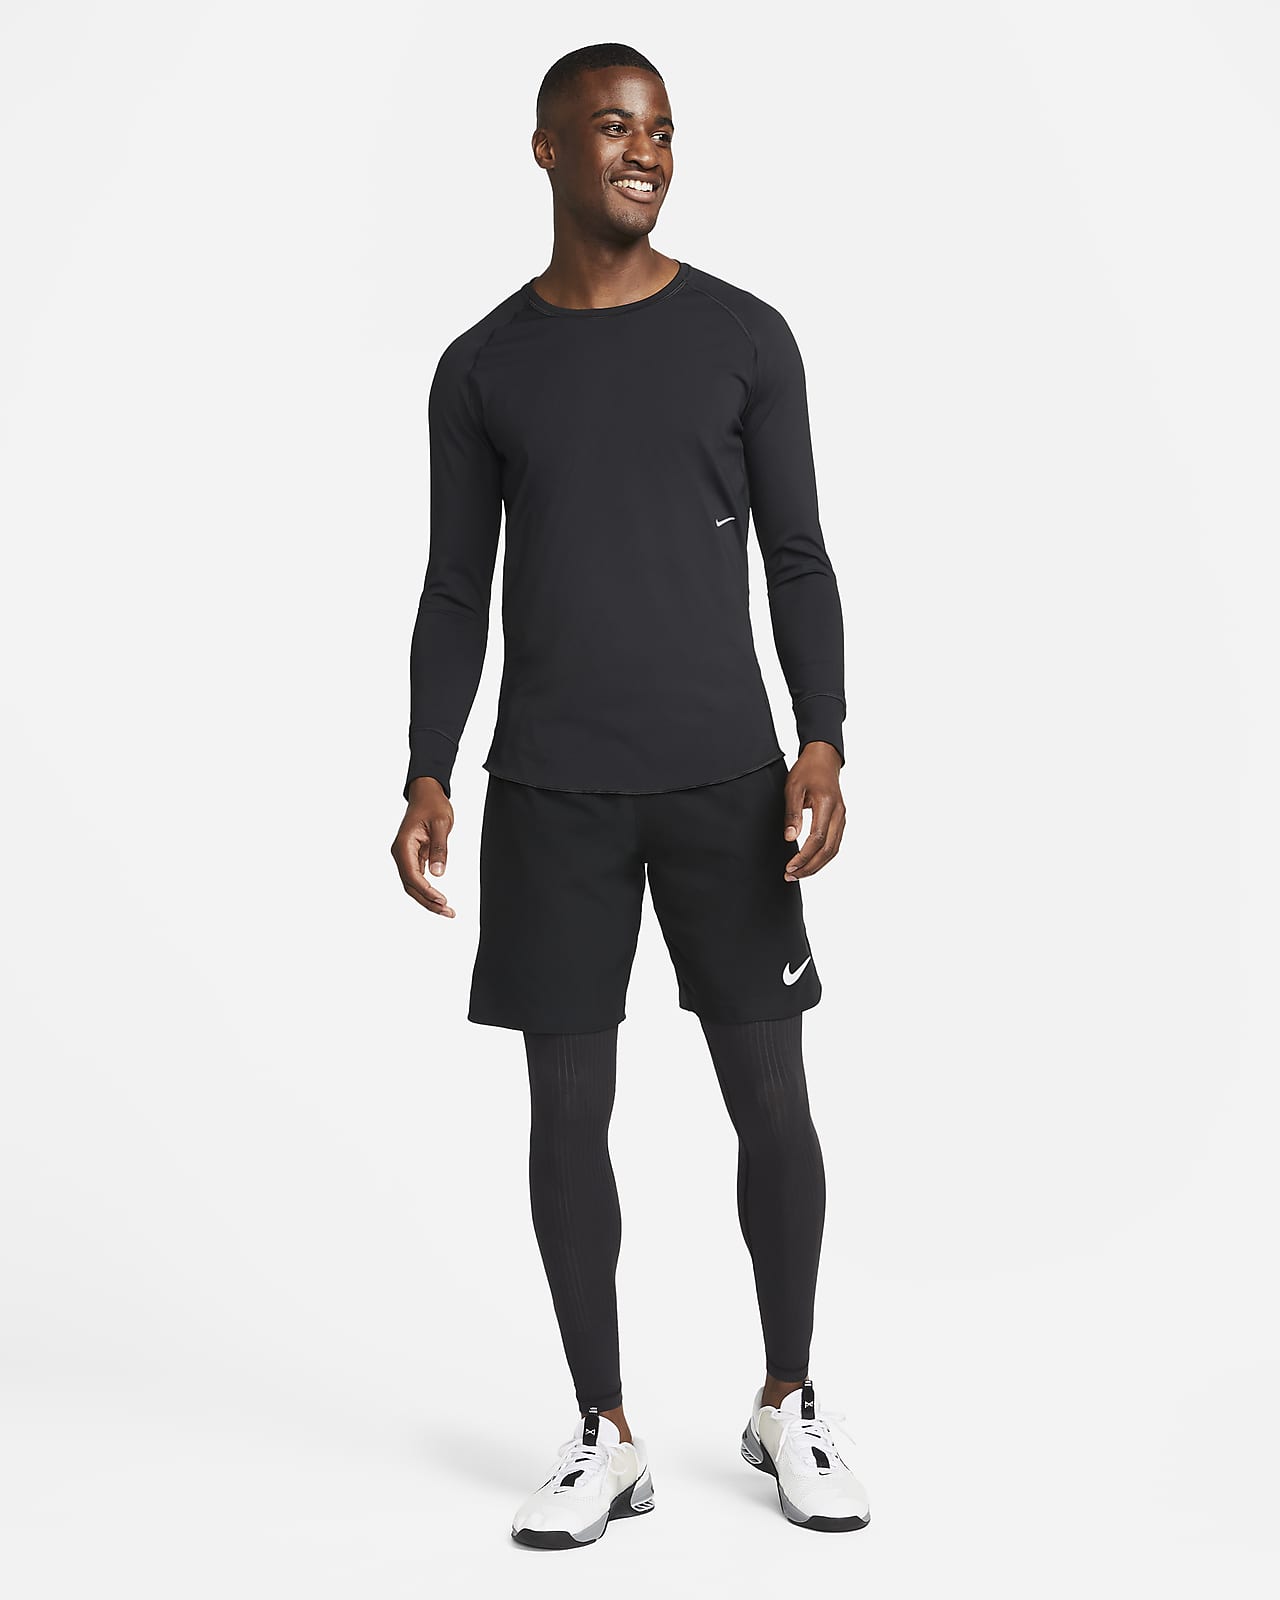 https://static.nike.com/a/images/t_PDP_1280_v1/f_auto,q_auto:eco/966b1828-f4ab-4c07-82ff-9afed3c048b5/aps-mens-dri-fit-adv-versatile-top-kW0w3s.png